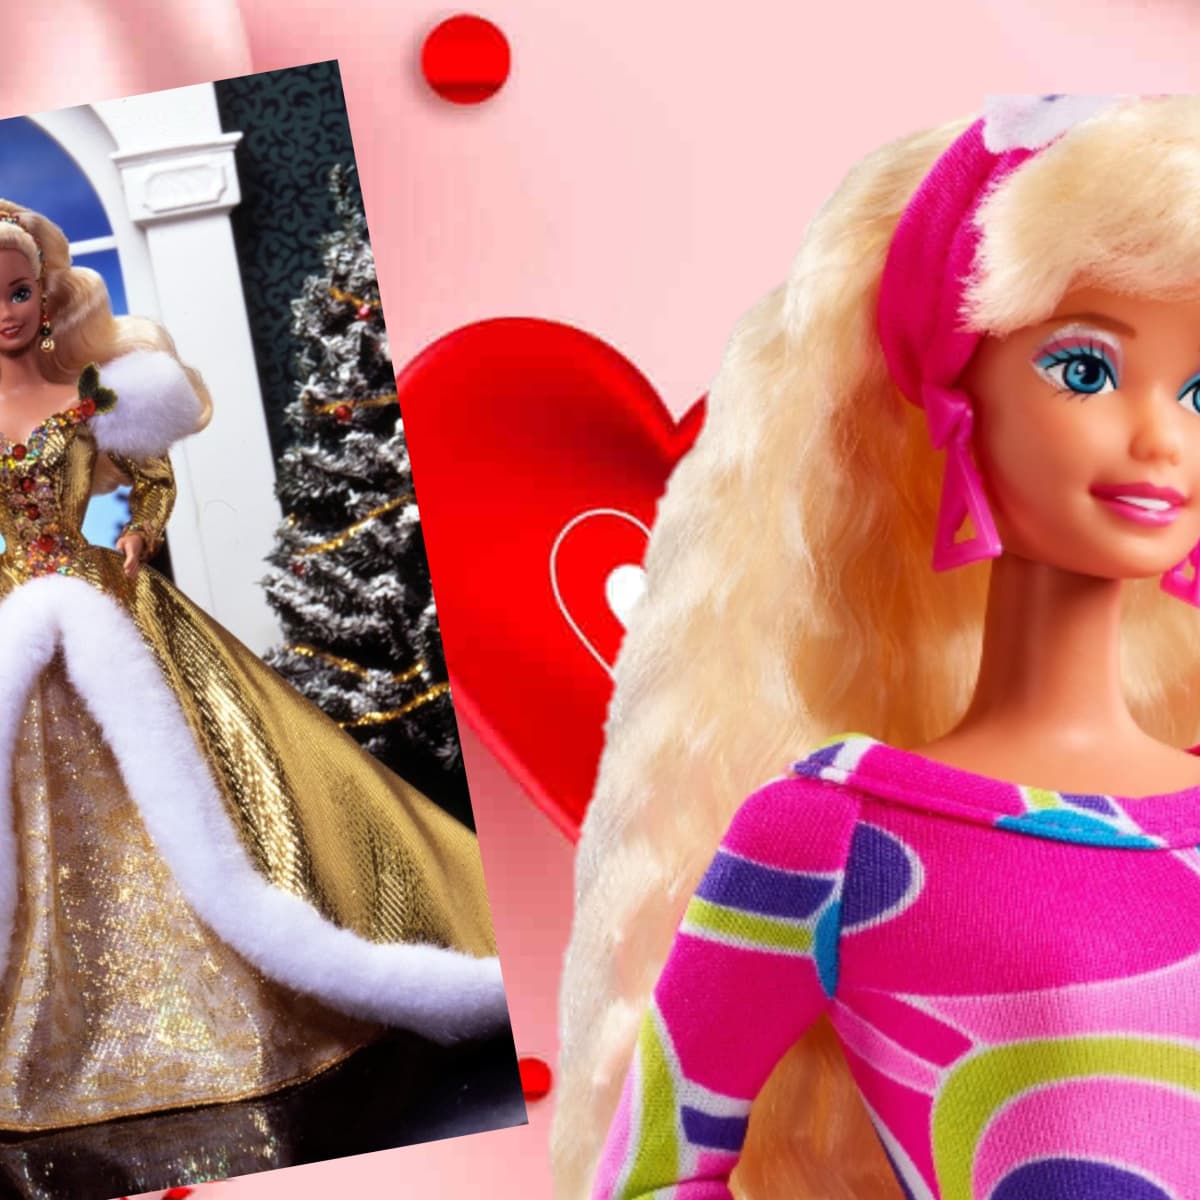 Why was Allan doll discontinued? Controversy behind the Barbie lore explored